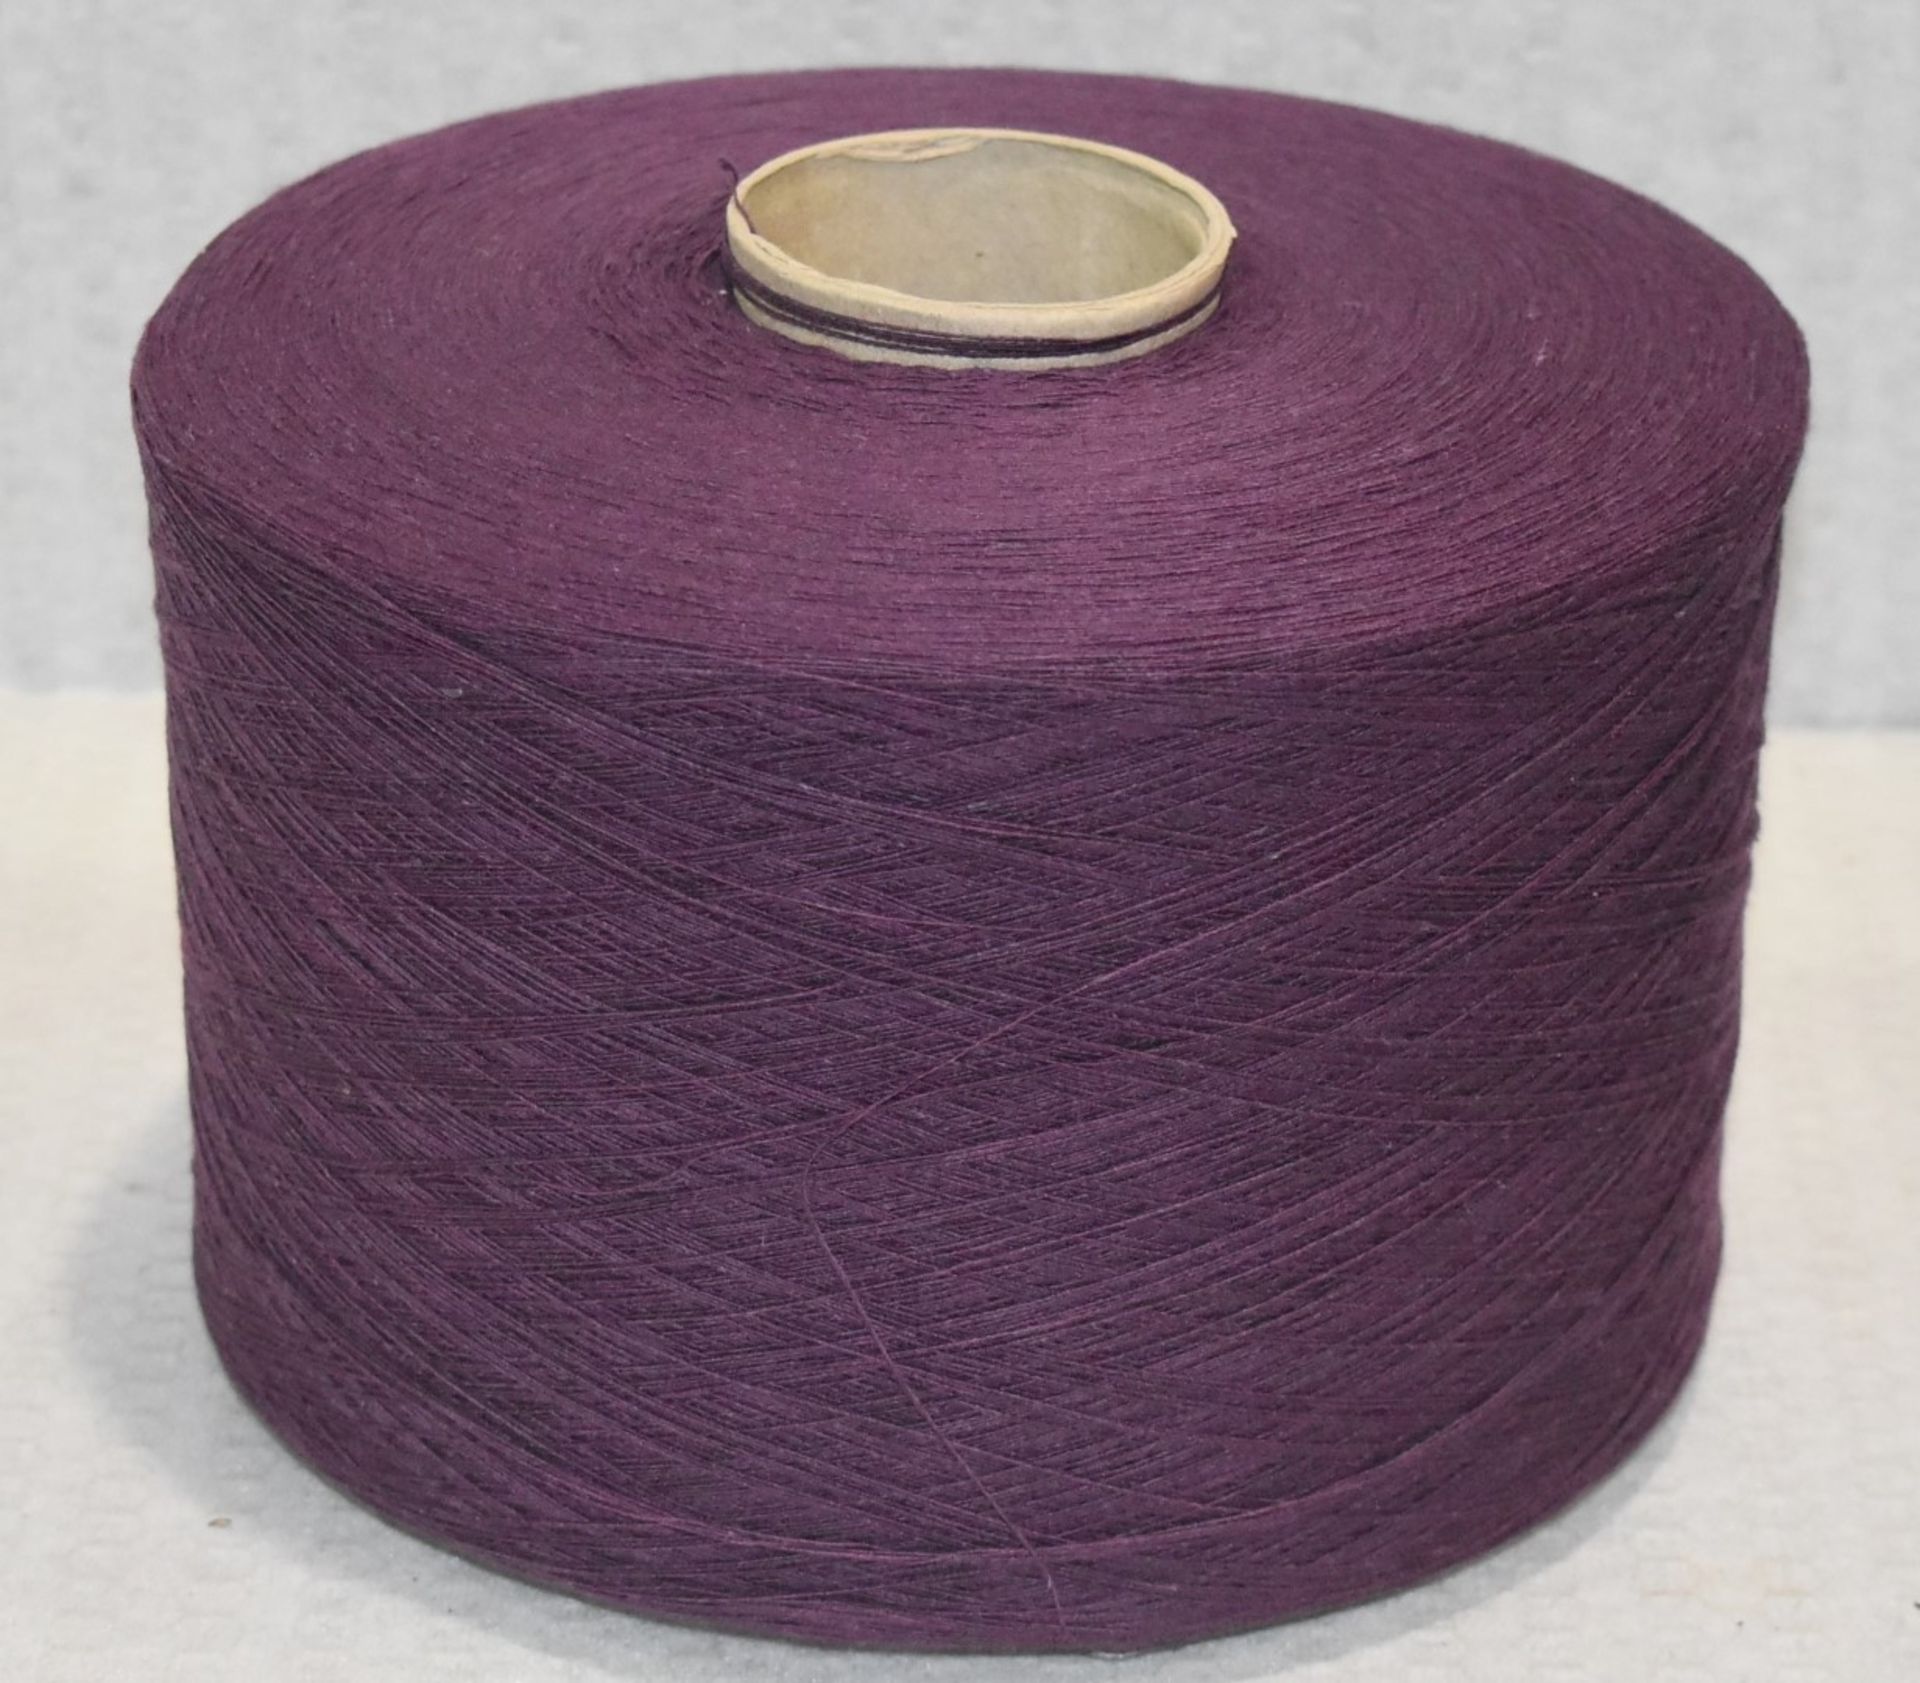 1 x Cone of 1/13 MicroCotton Knitting Yarn - Purple - Approx Weight: 2,300g - New Stock ABL Yarn - Image 2 of 9